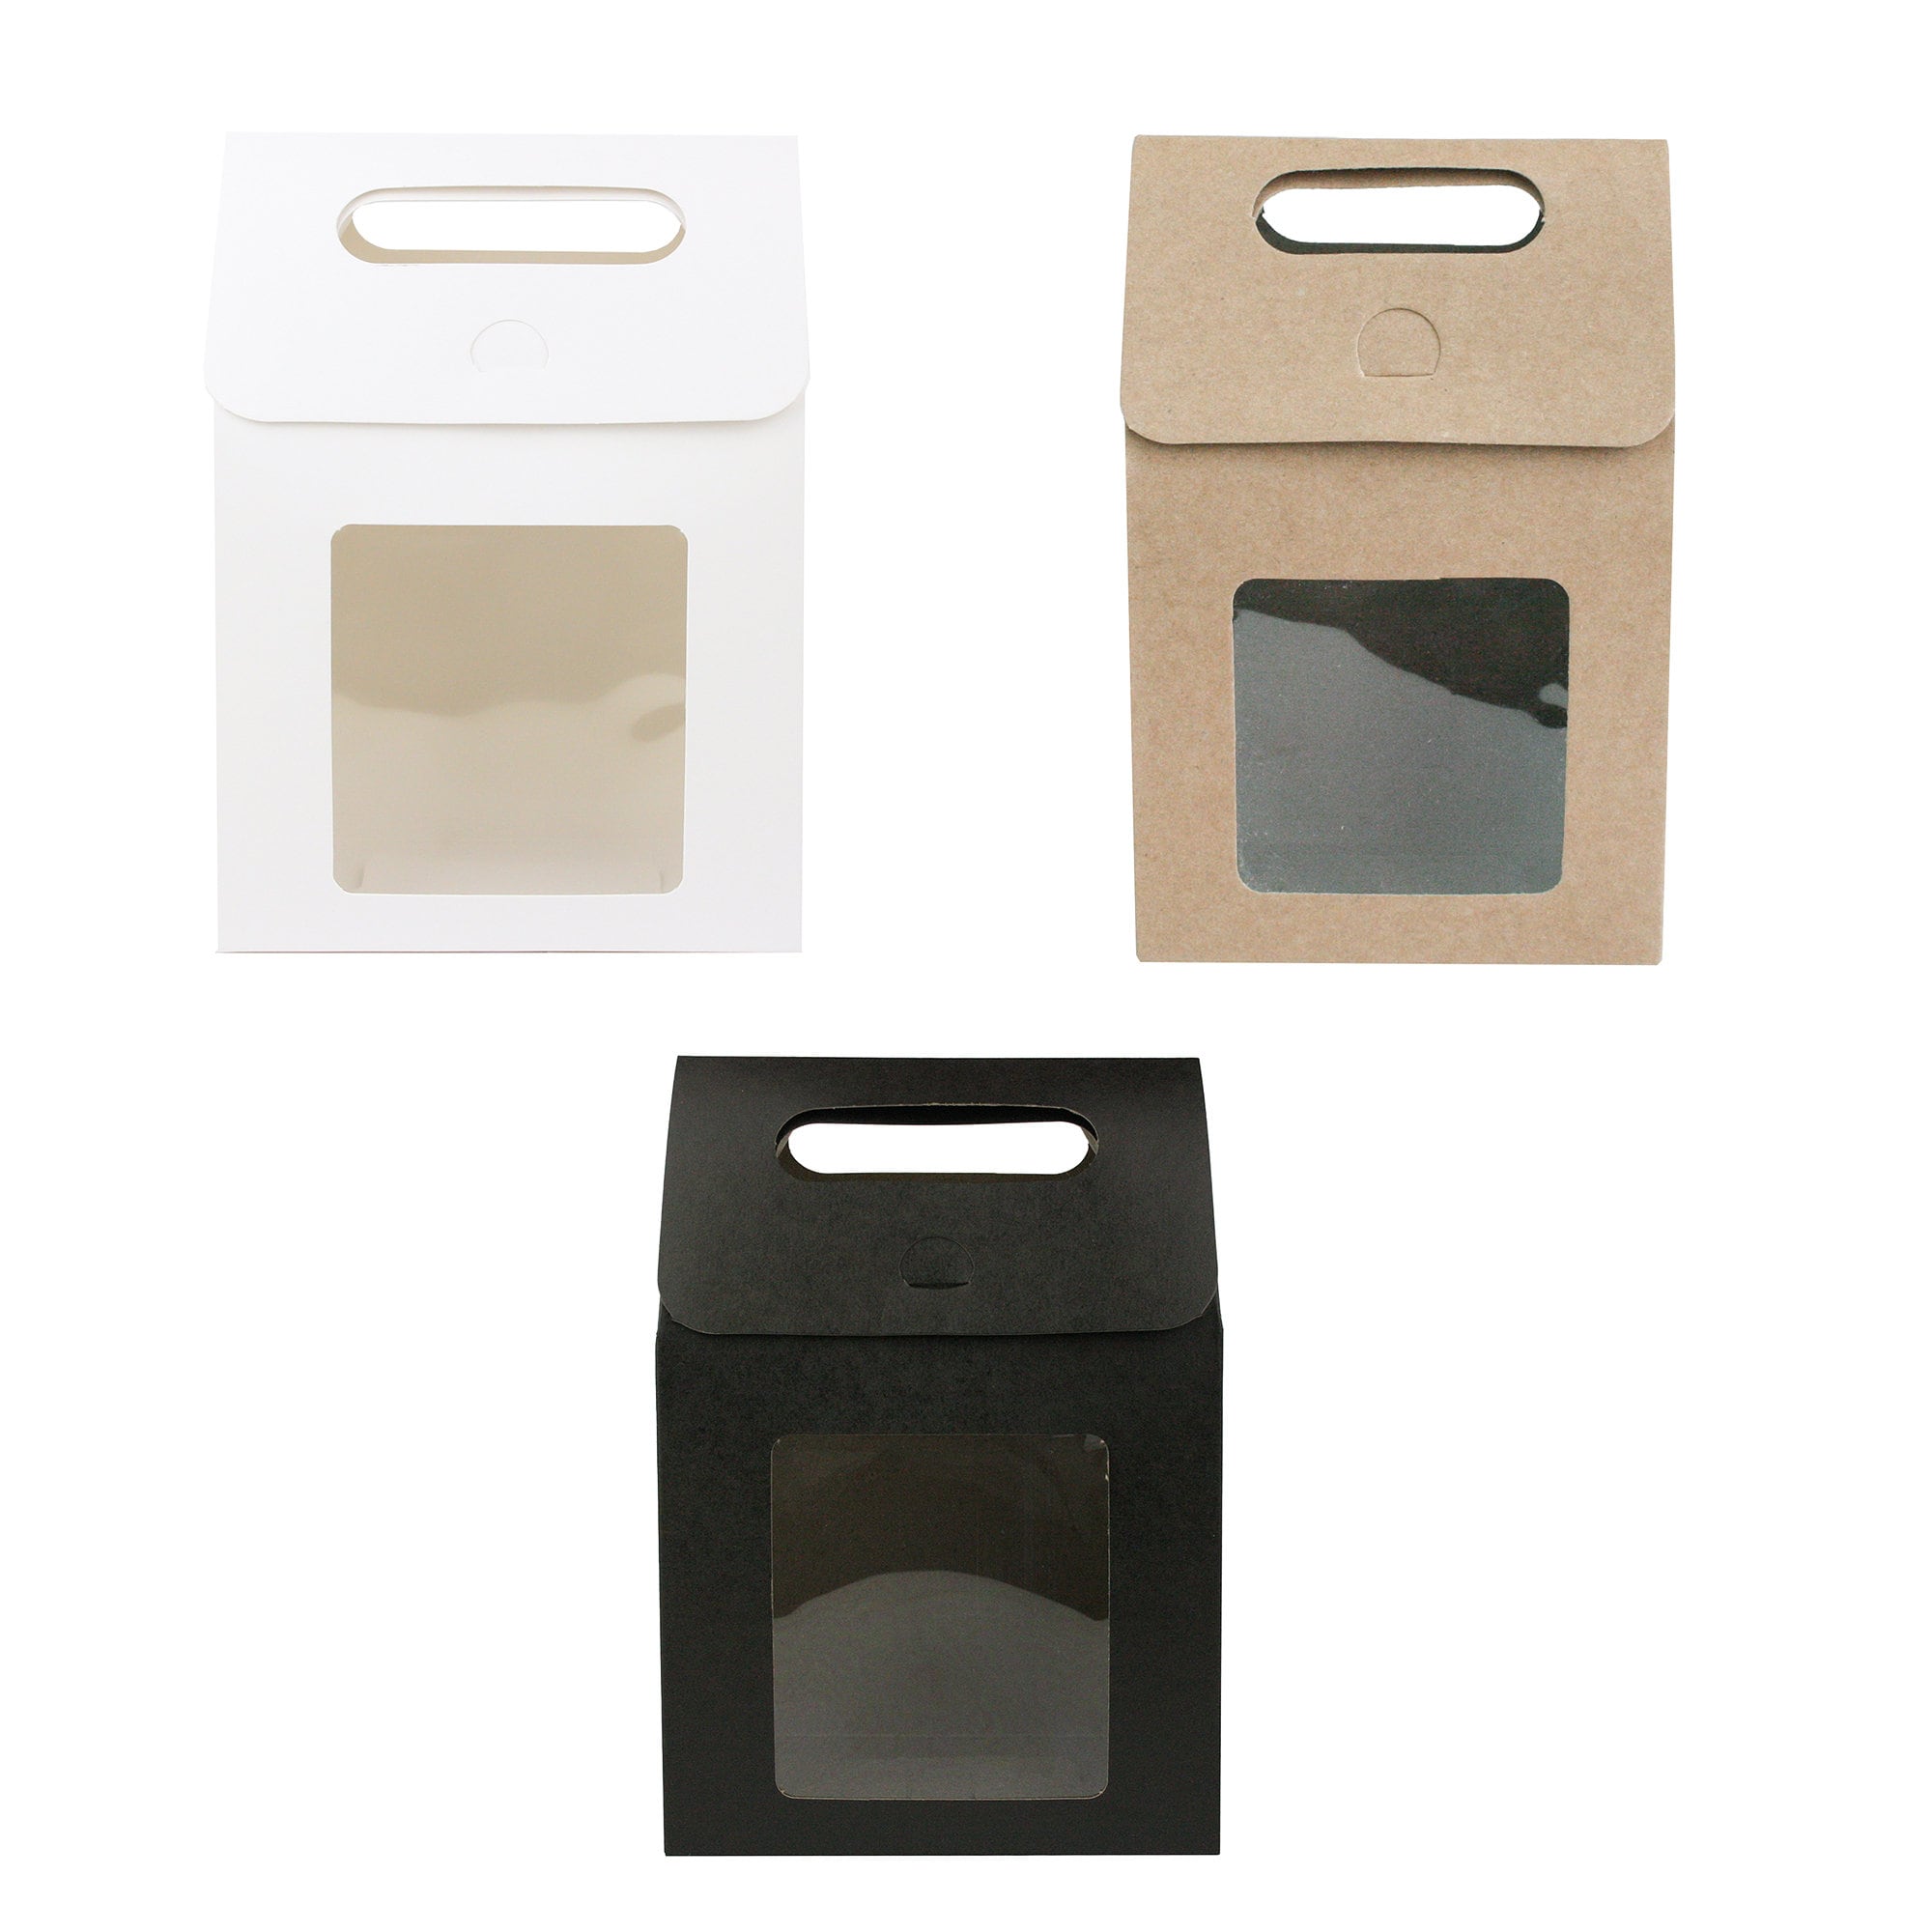 Brown Soap Packaging Boxes Paper Soap Box With Window Rectangle Window Gift  Box for Homemade Soap Making Supplies 3.34 X 2.36 X 1.18 Inch 